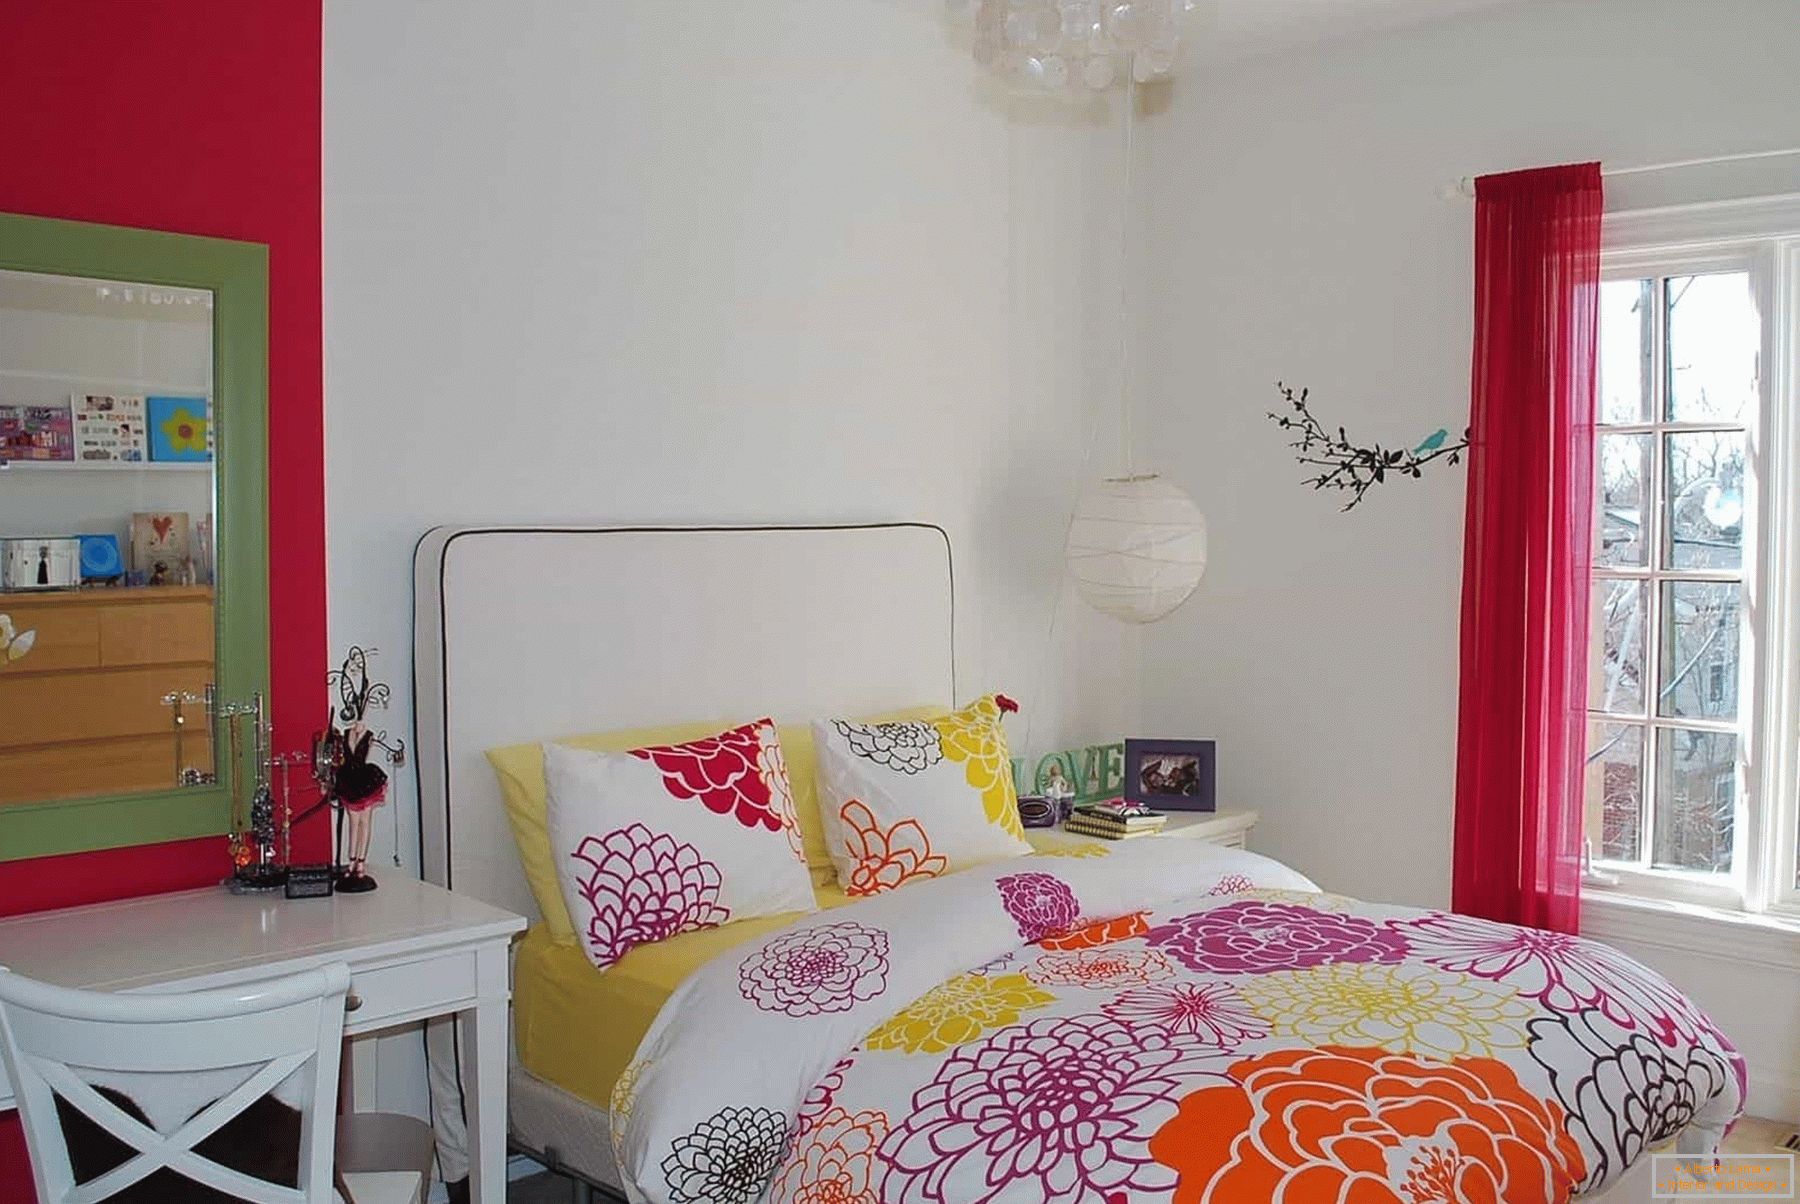 In the white room of a teenage girl - colored bedding and decor elements